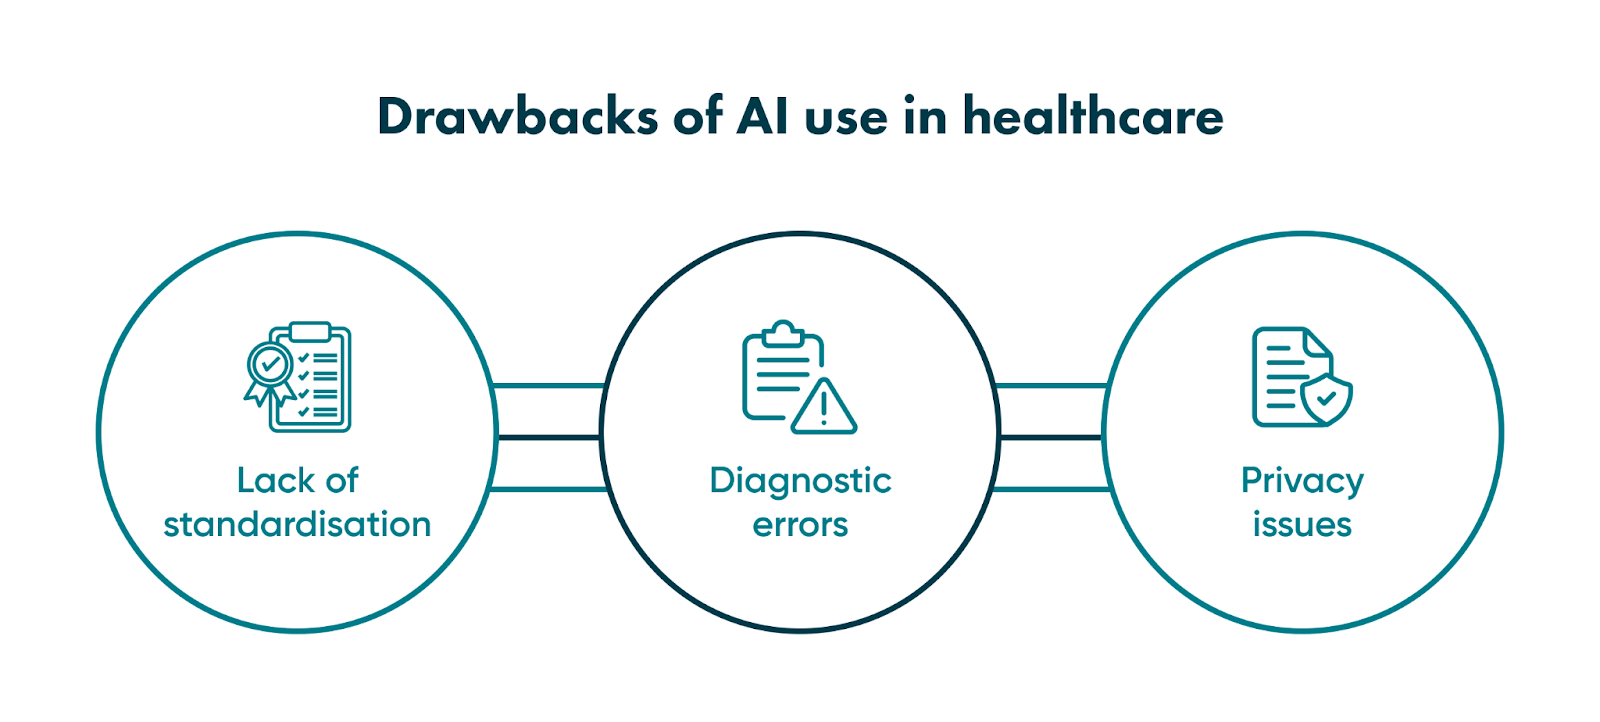 Even though artificial intelligence in healthcare has great potential, it still has some drawbacks you need to consider. 